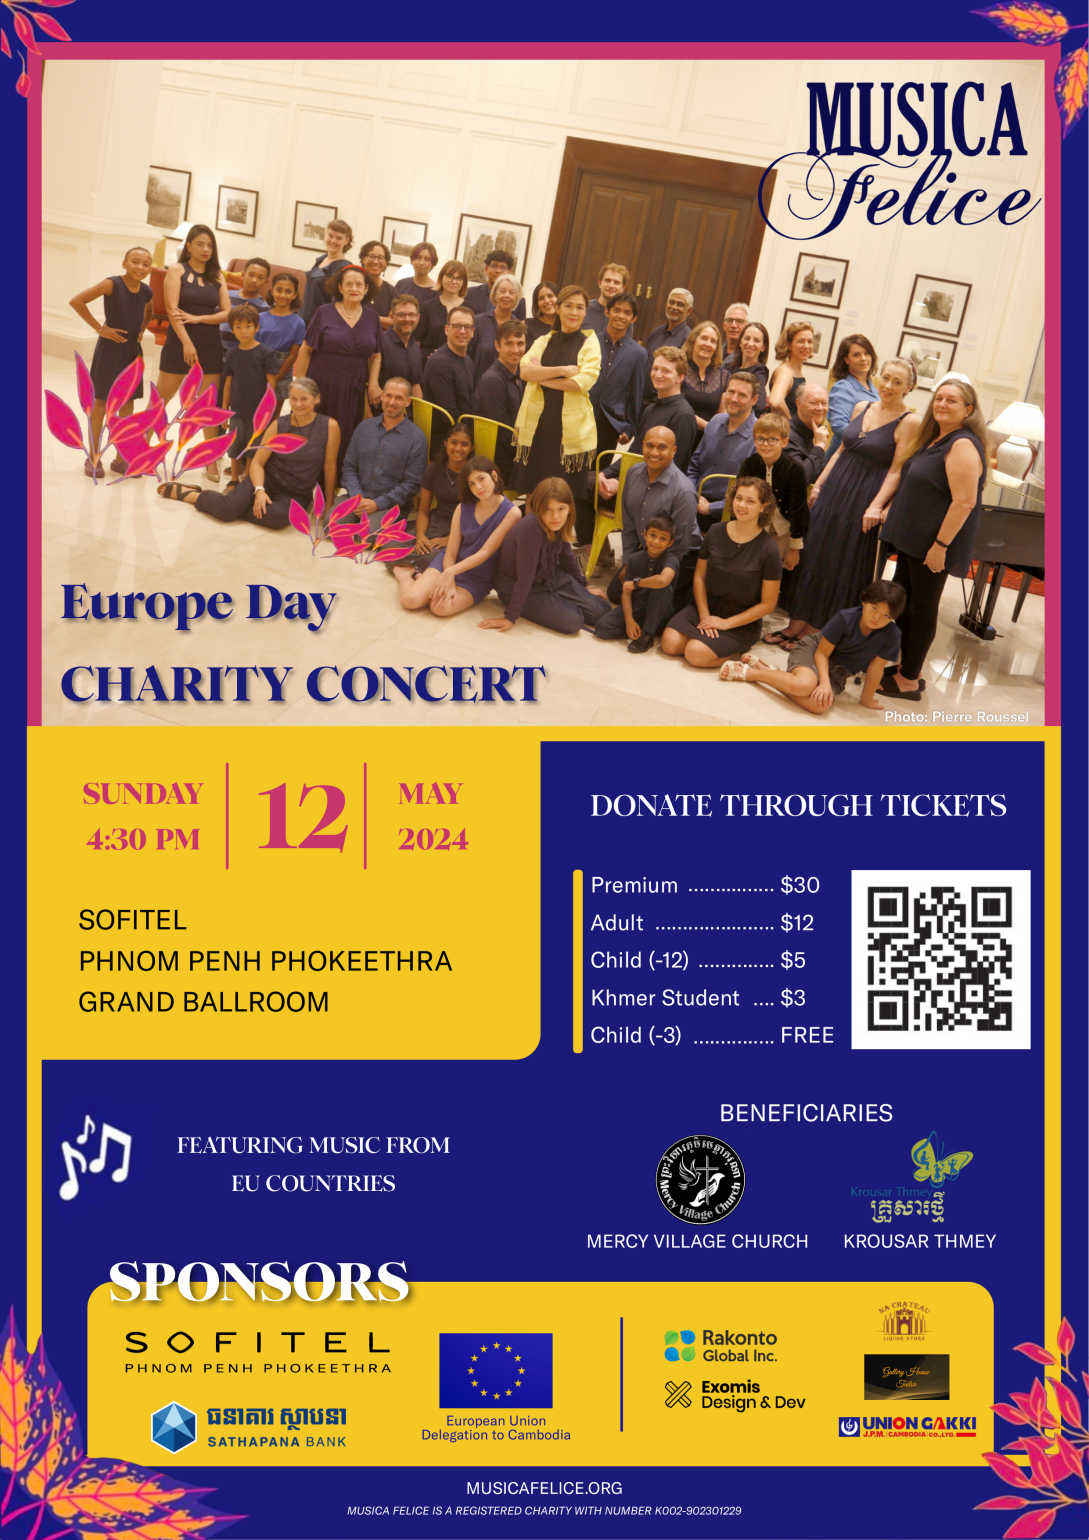 Donations from this Europe Day celebration will raise funds for two Cambodian organizations that help children.